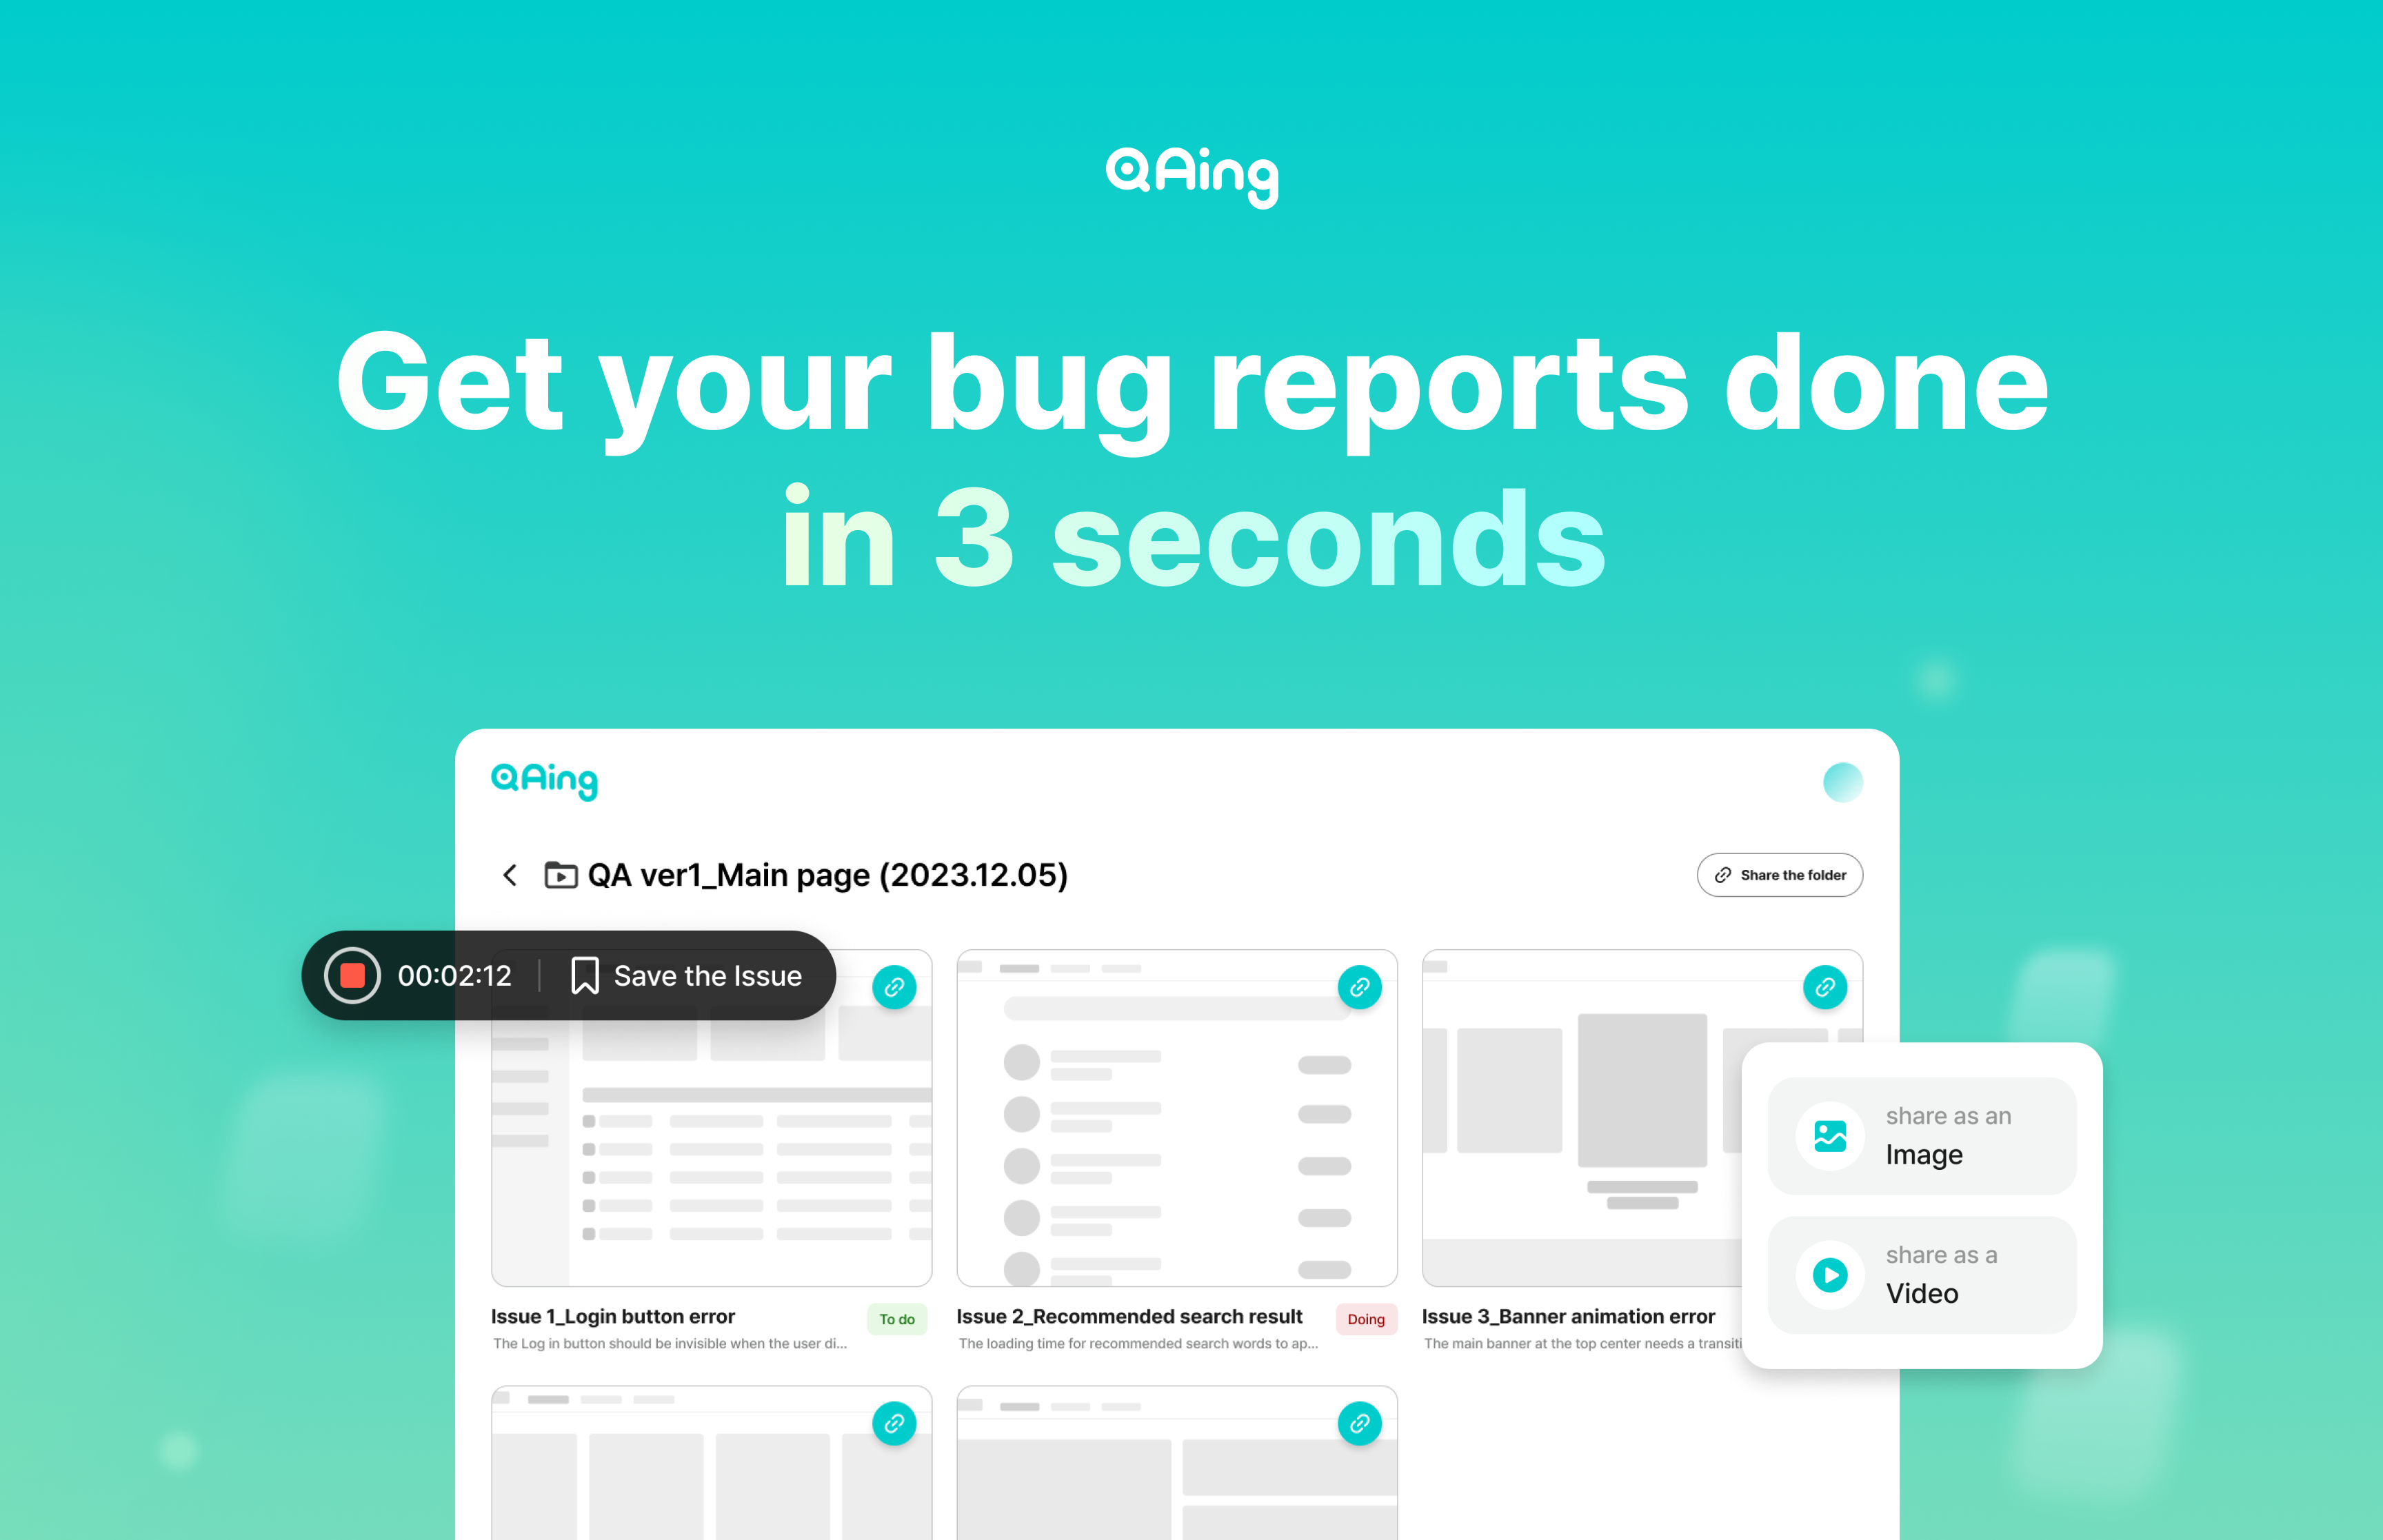 qaing - Get your bug reports done in 3 seconds